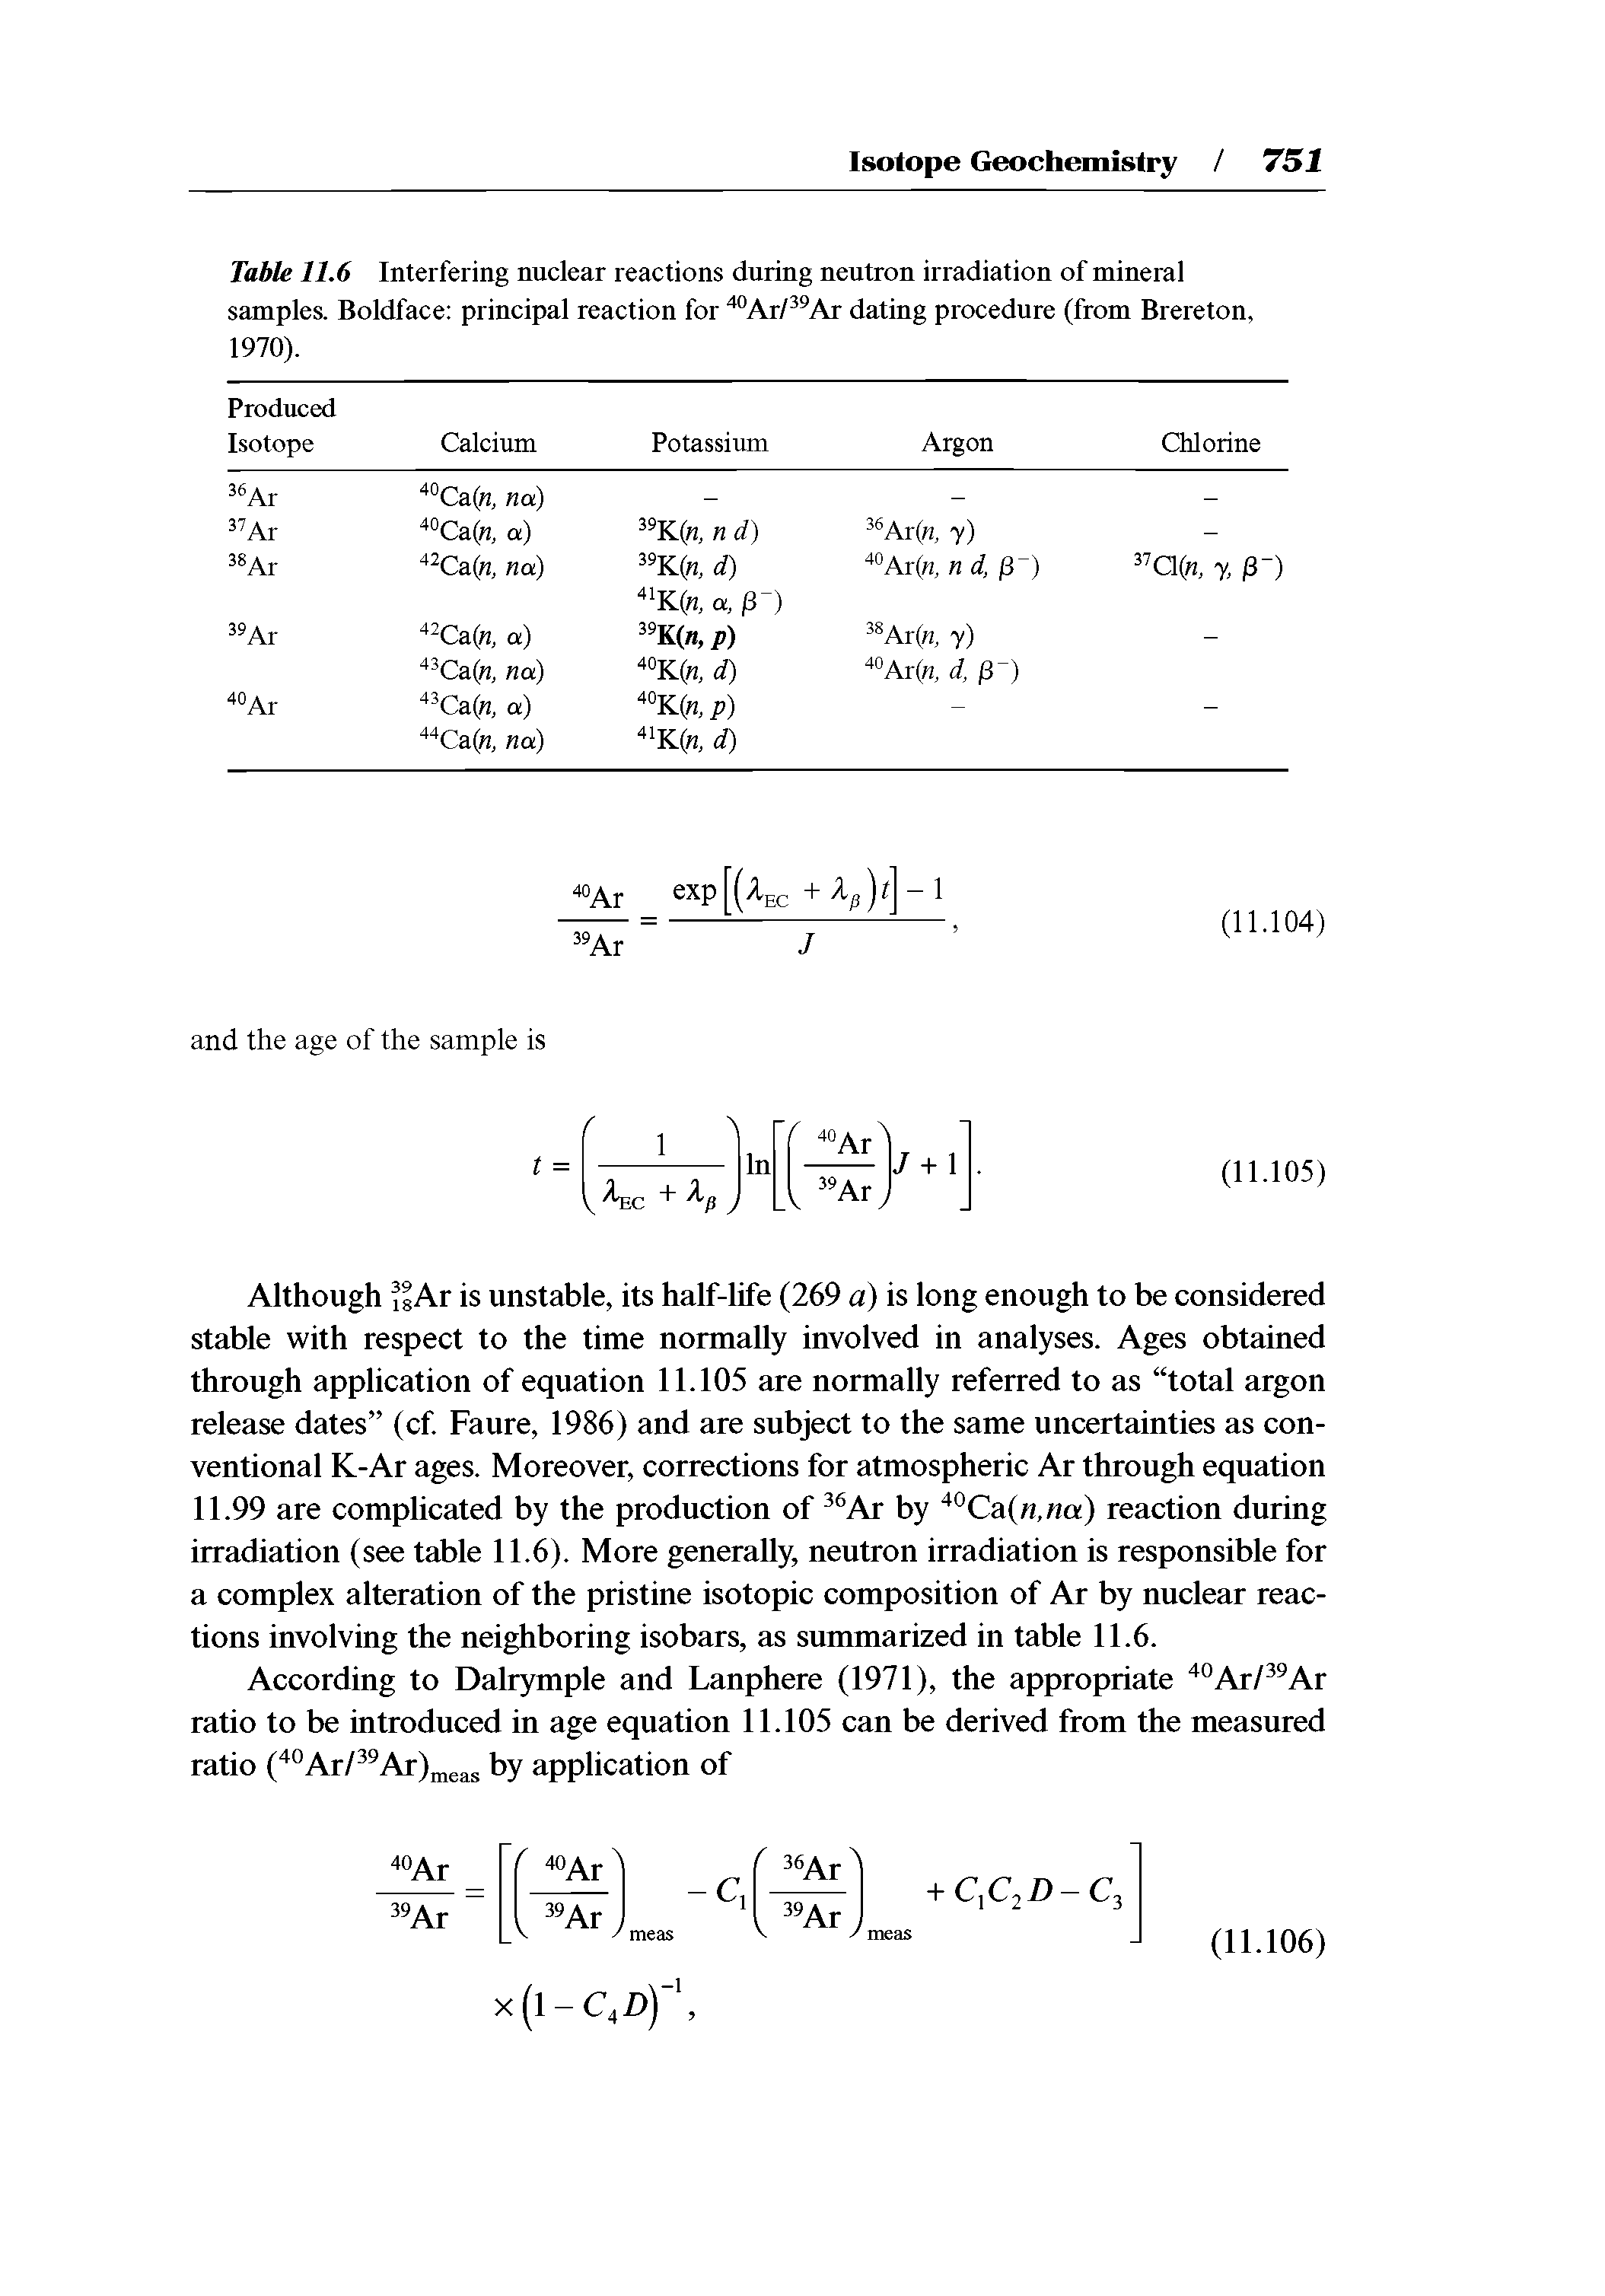 Table 11.6 Interfering nuclear reactions during neutron irradiation of mineral samples. Boldface principal reaction for " °Ar/ Ar dating procedure (from Brereton, 1970).